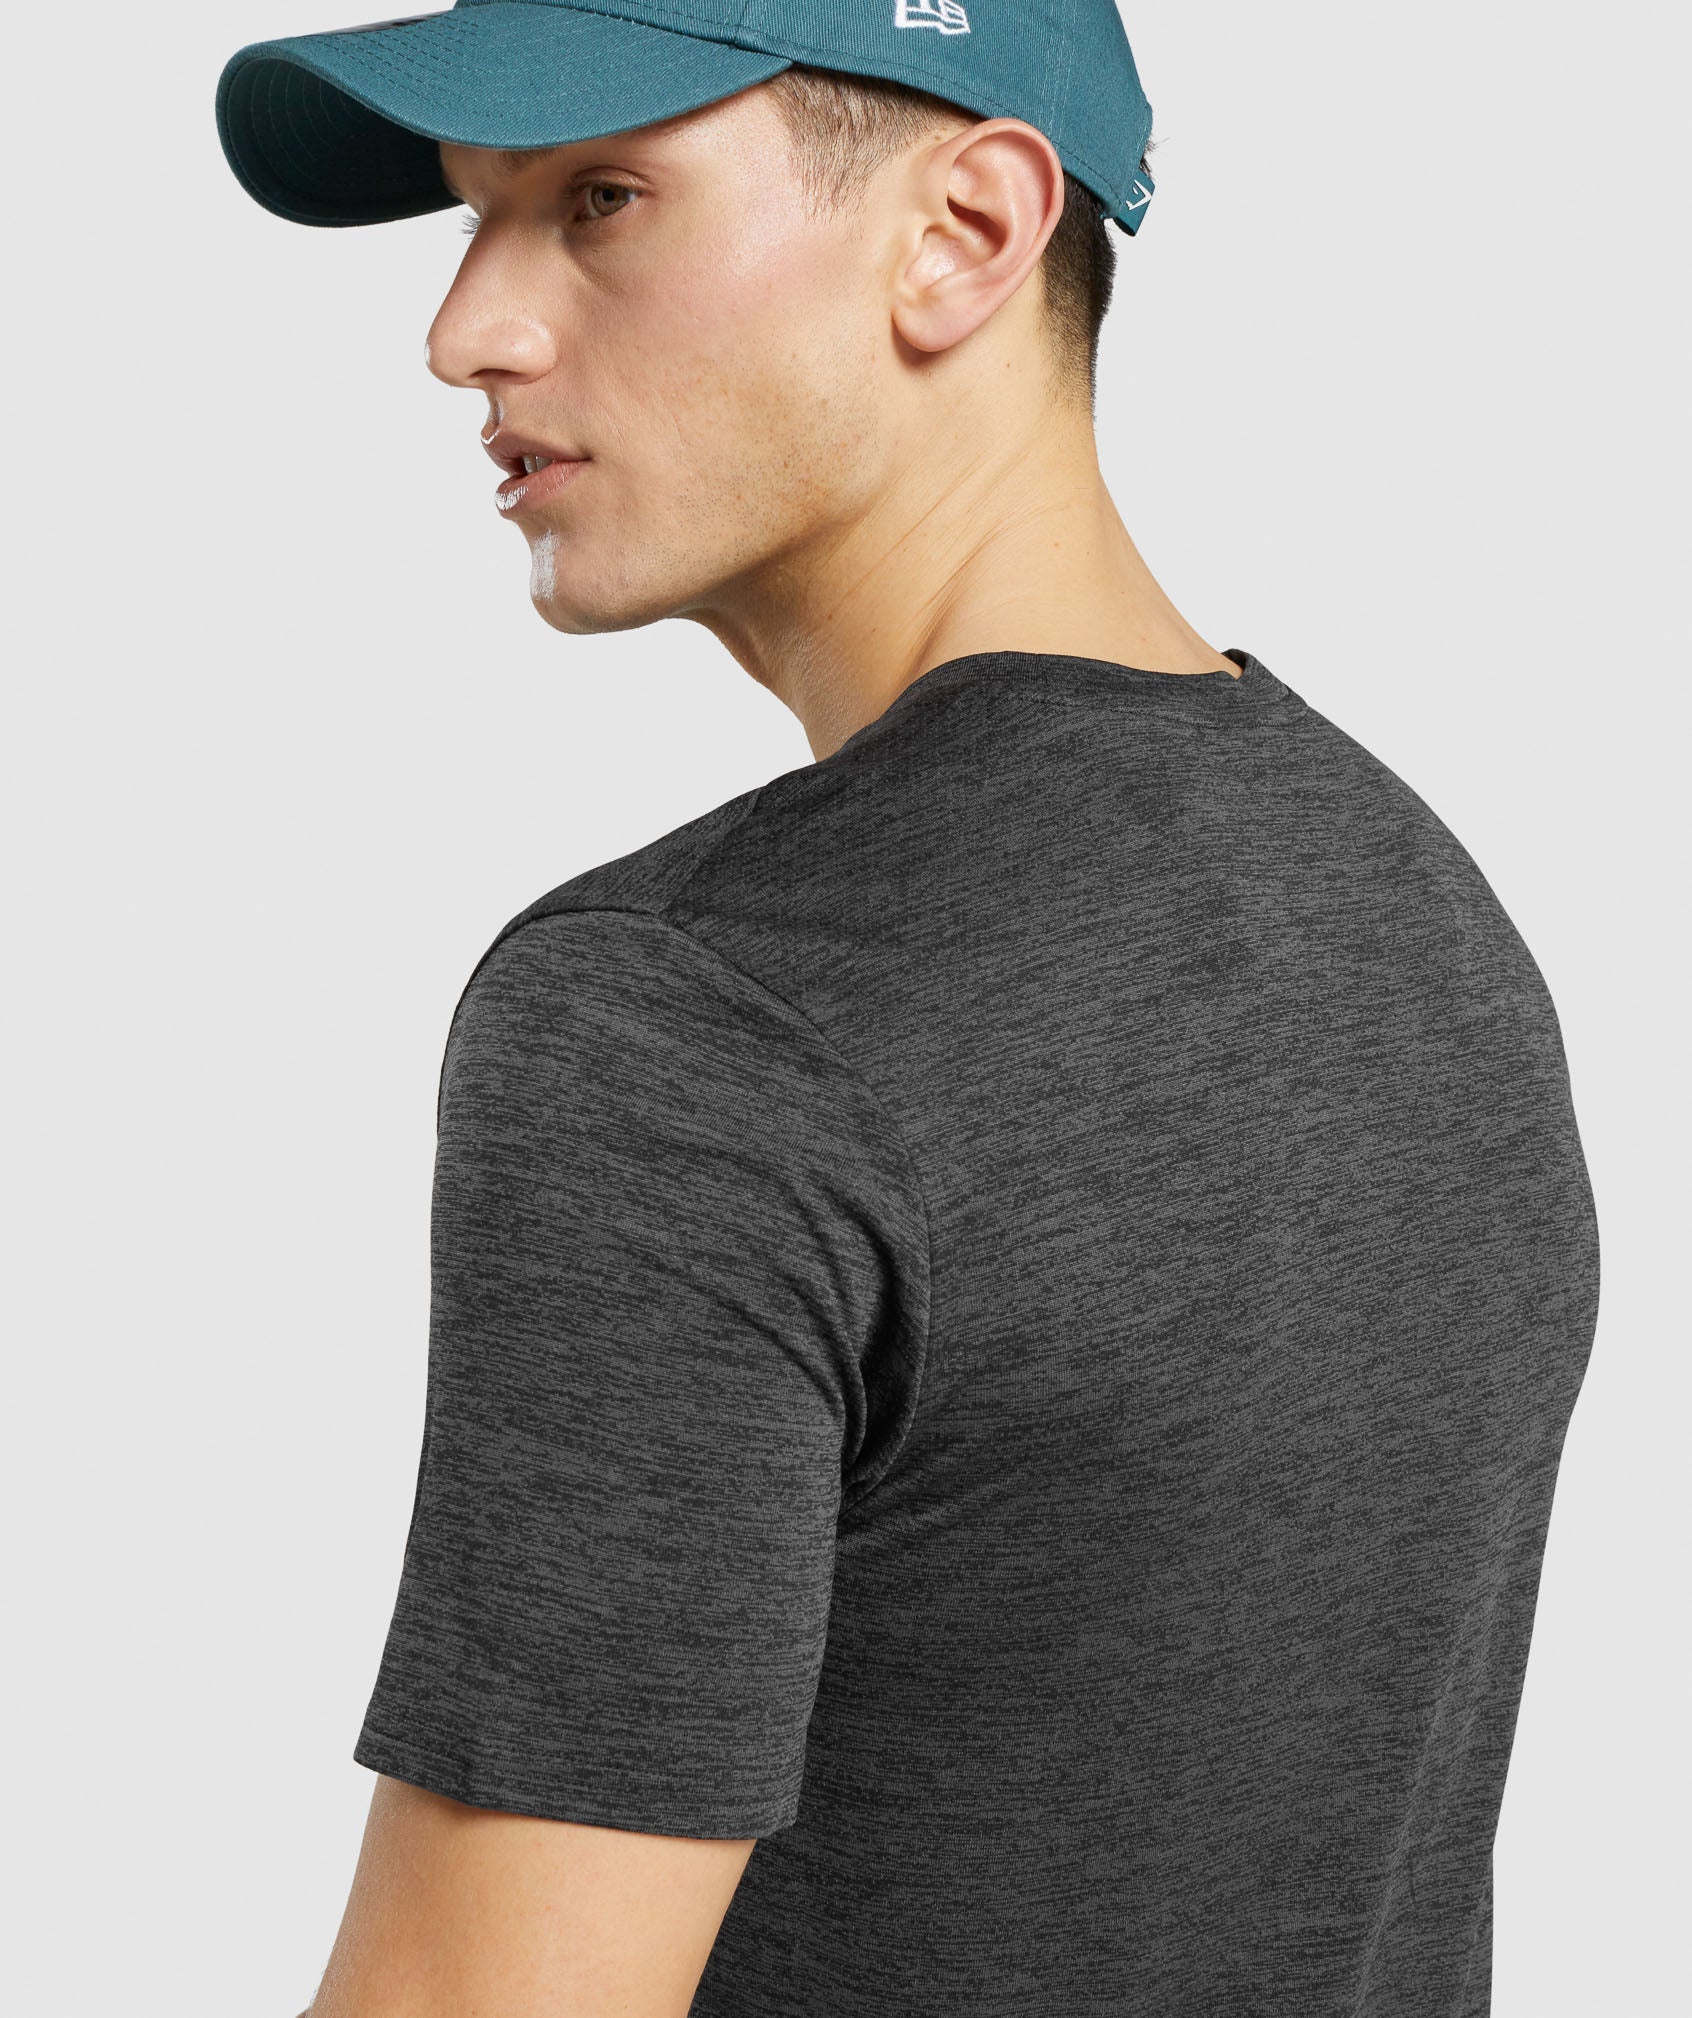 Arrival Marl T-Shirt in Black - view 7